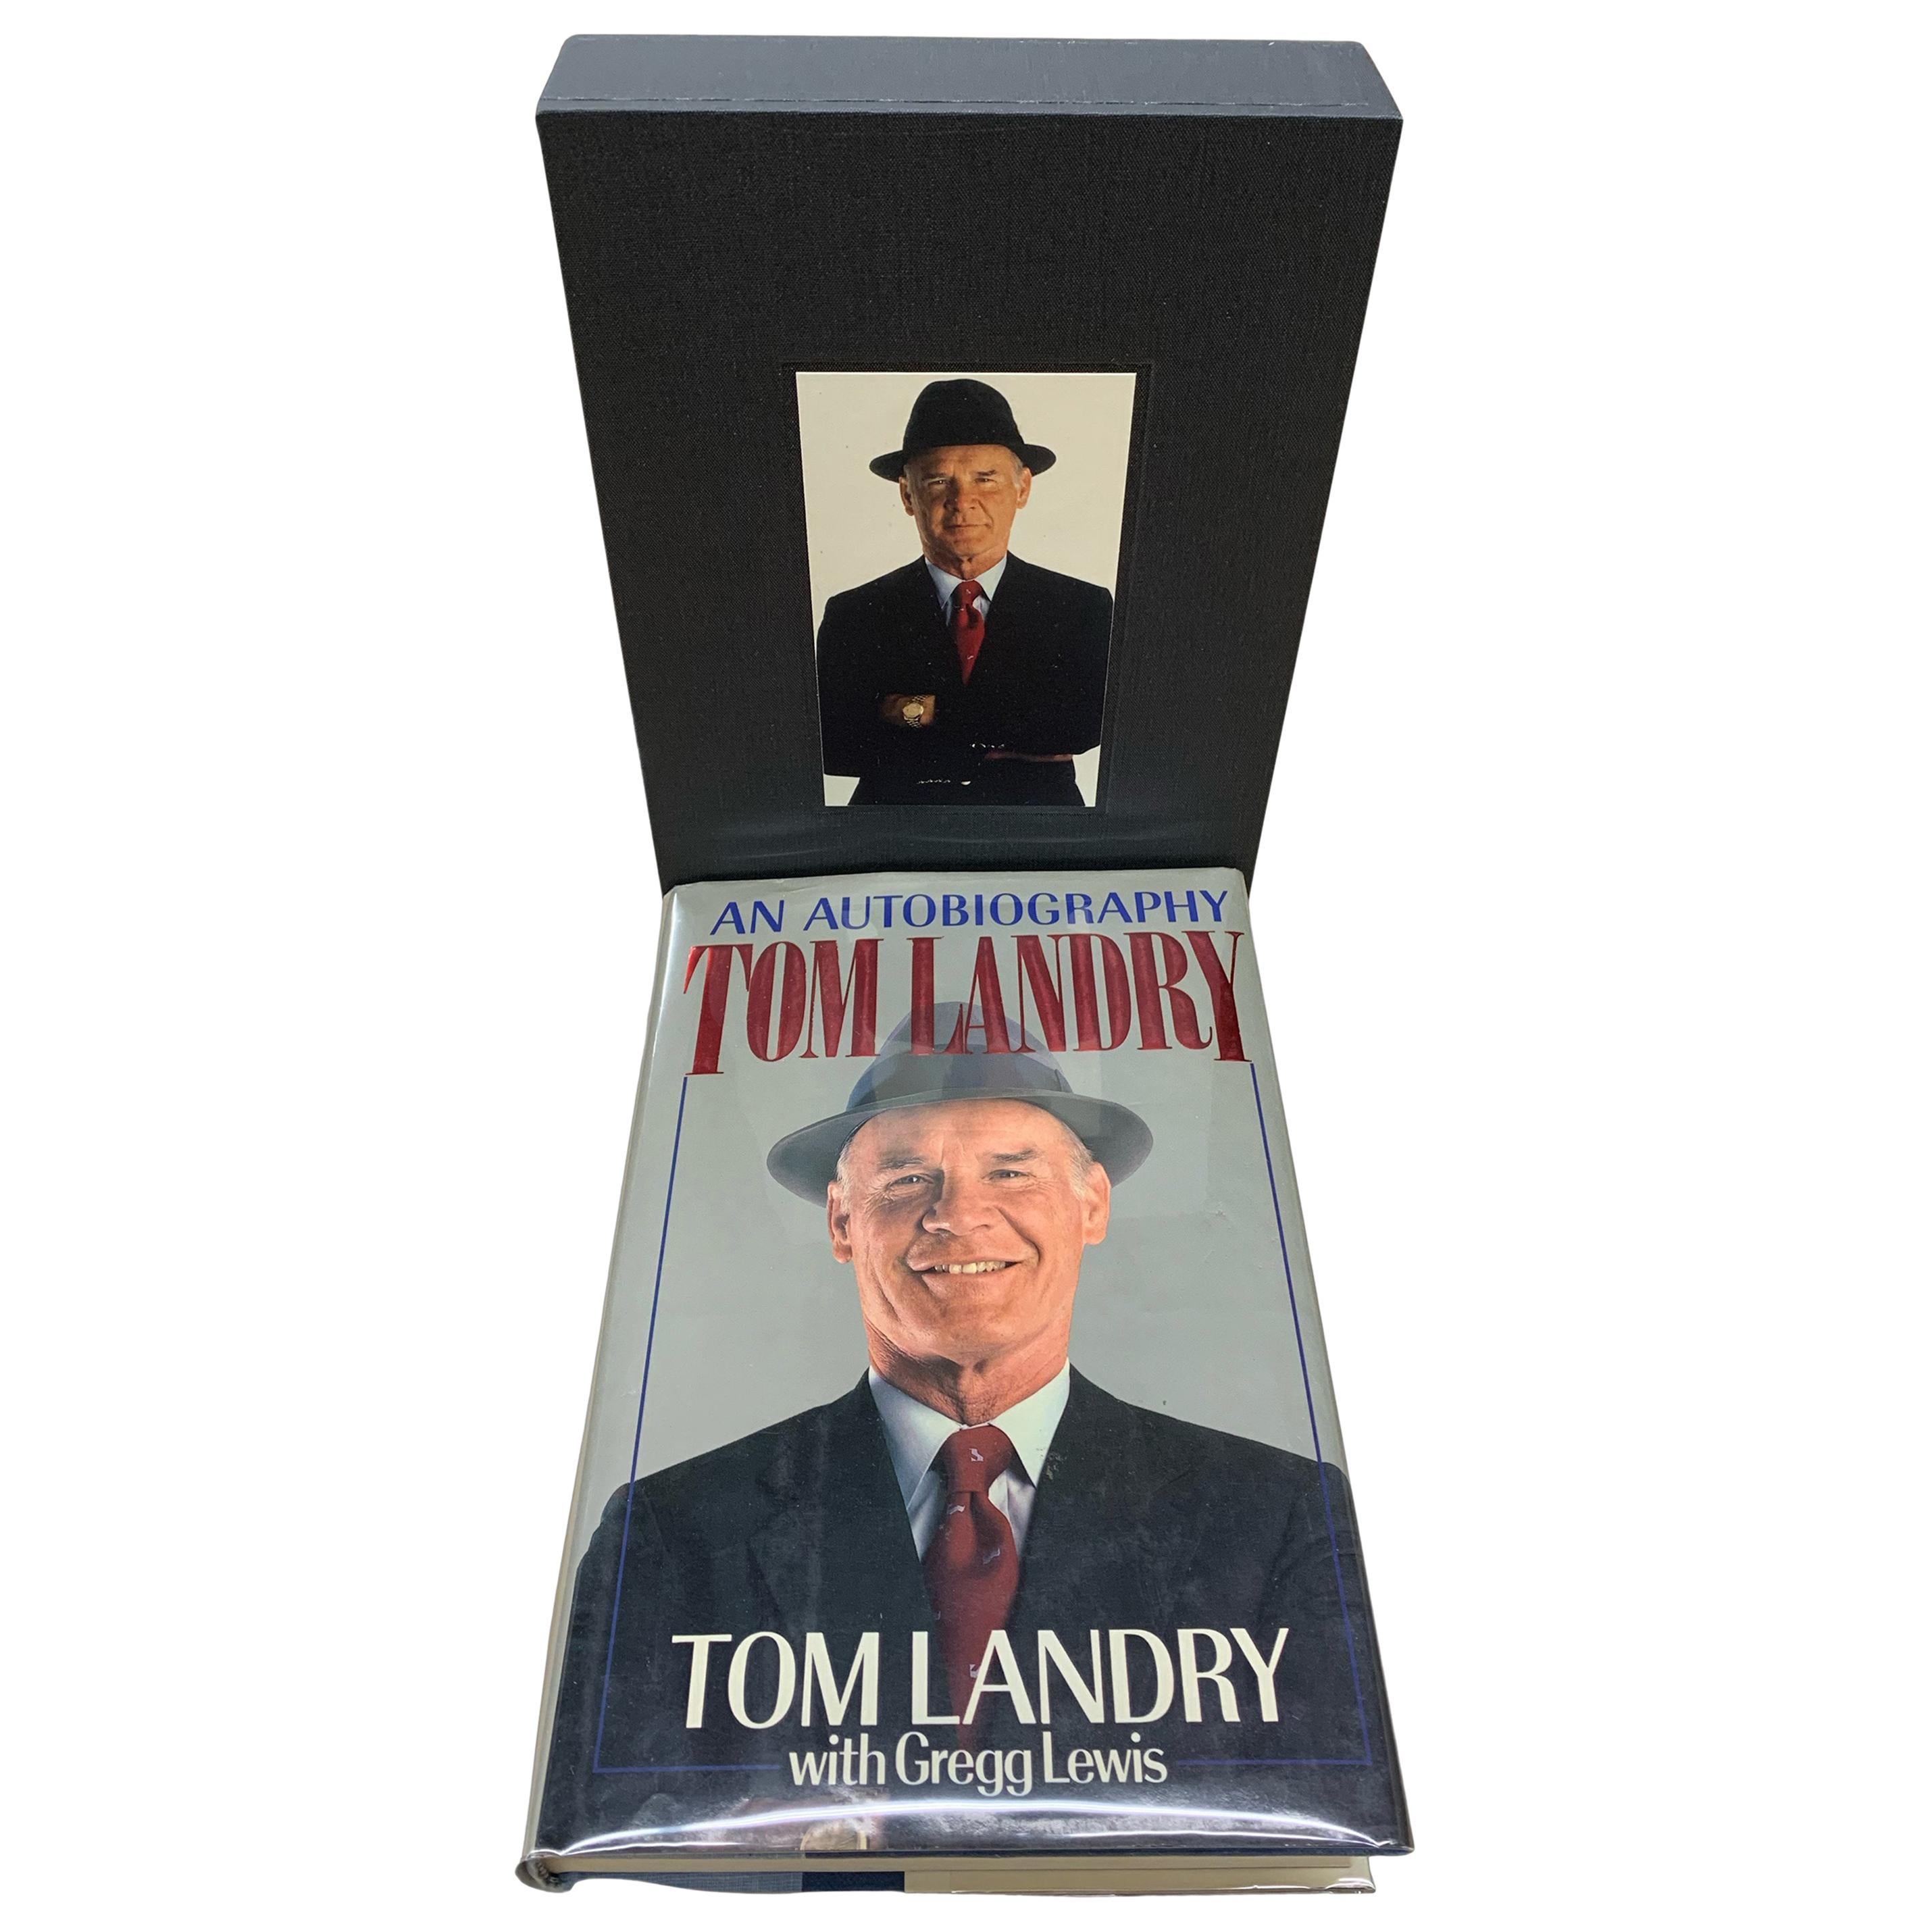 Tom Landry An Autobiography, Signed and Inscribed by Tom Landry, 1st Ed., 1990